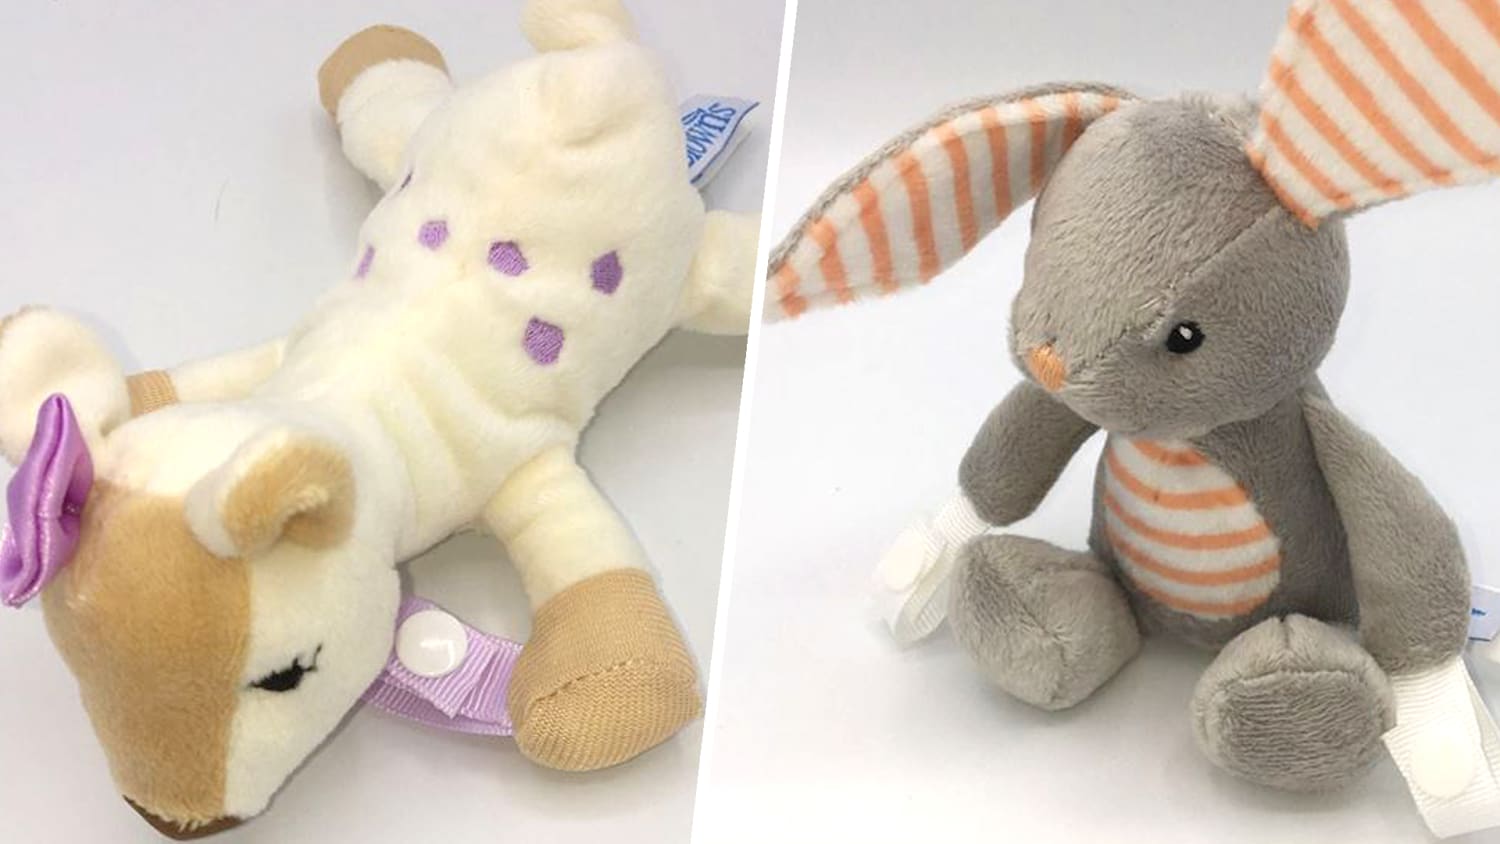 Dr. Brown's Lovey pacifiers & holders are being recalled